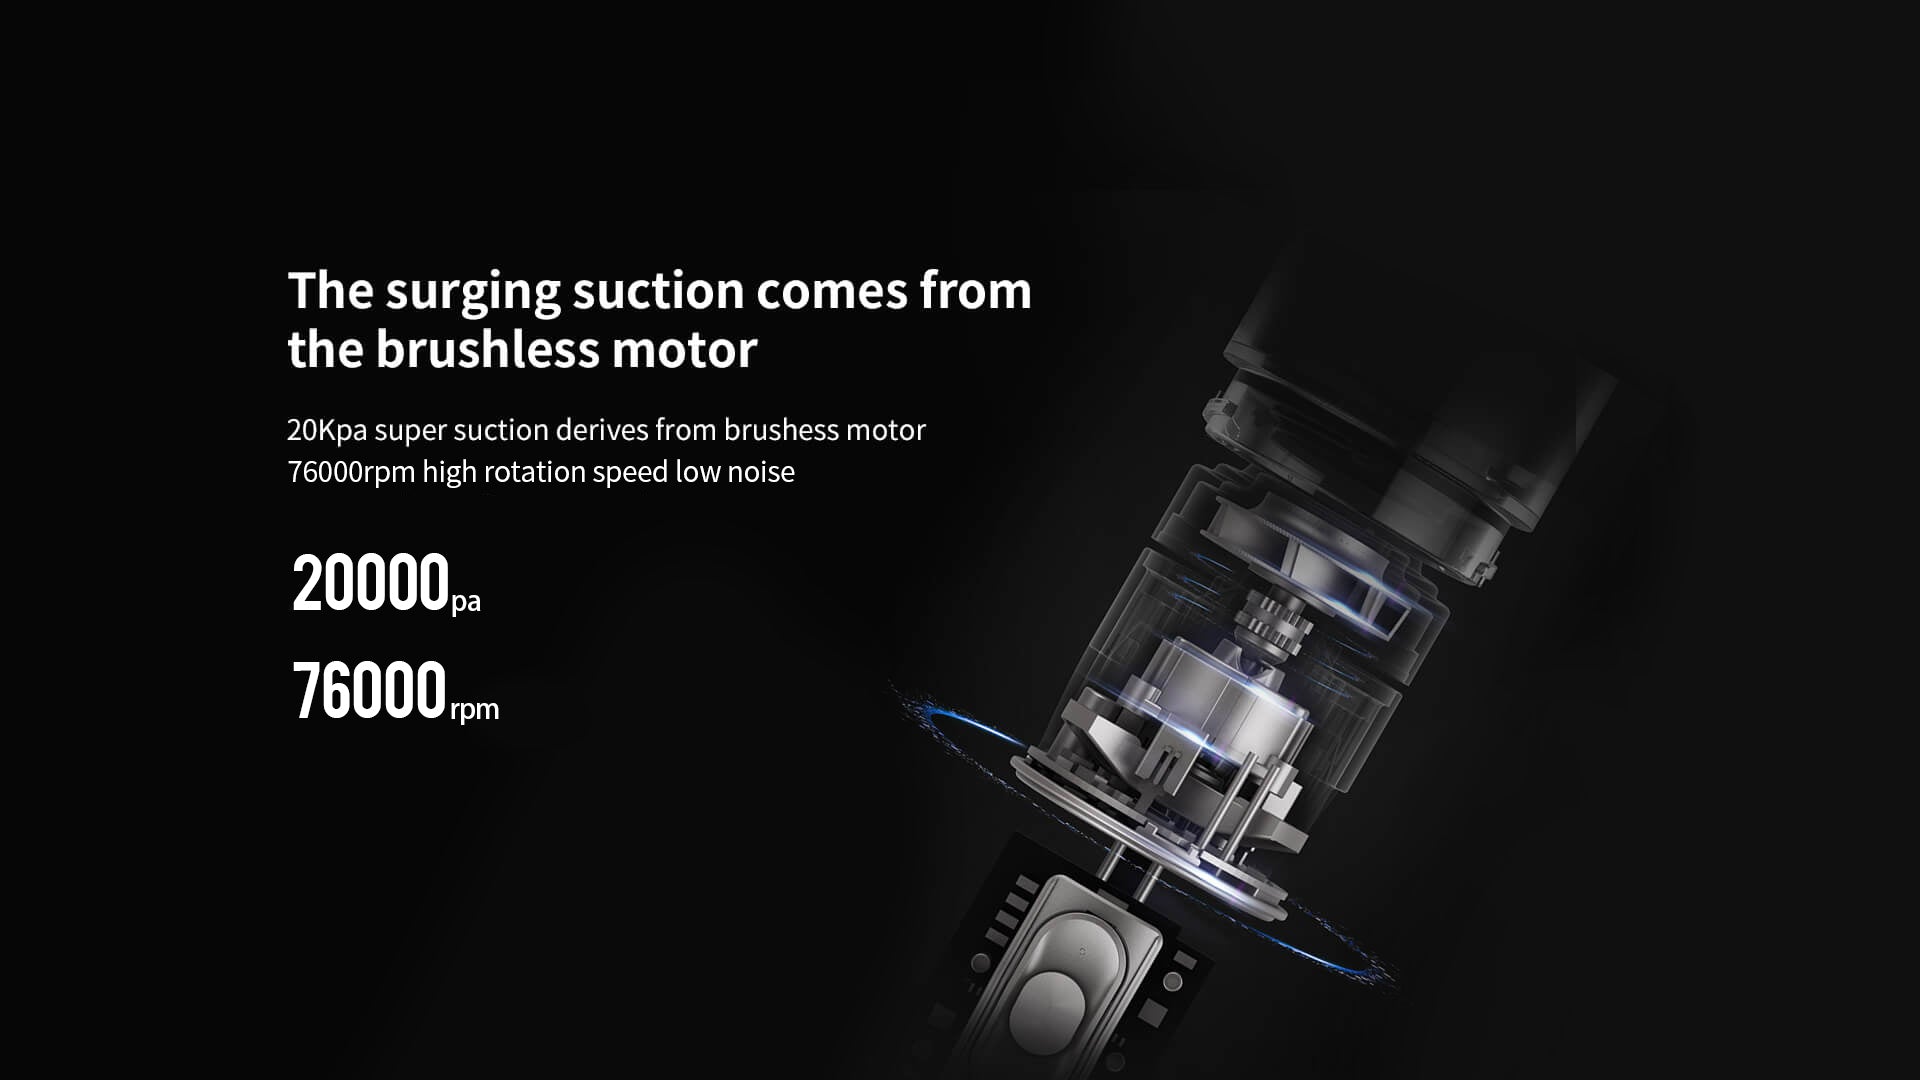 The surging suction comes from the brushless motorHight-speed brushless motor,20000pa tDisruptive big suction,three 21700 battery cells 40min lasting working,wireless charging base,intelligent chip,triple high-effect filtering